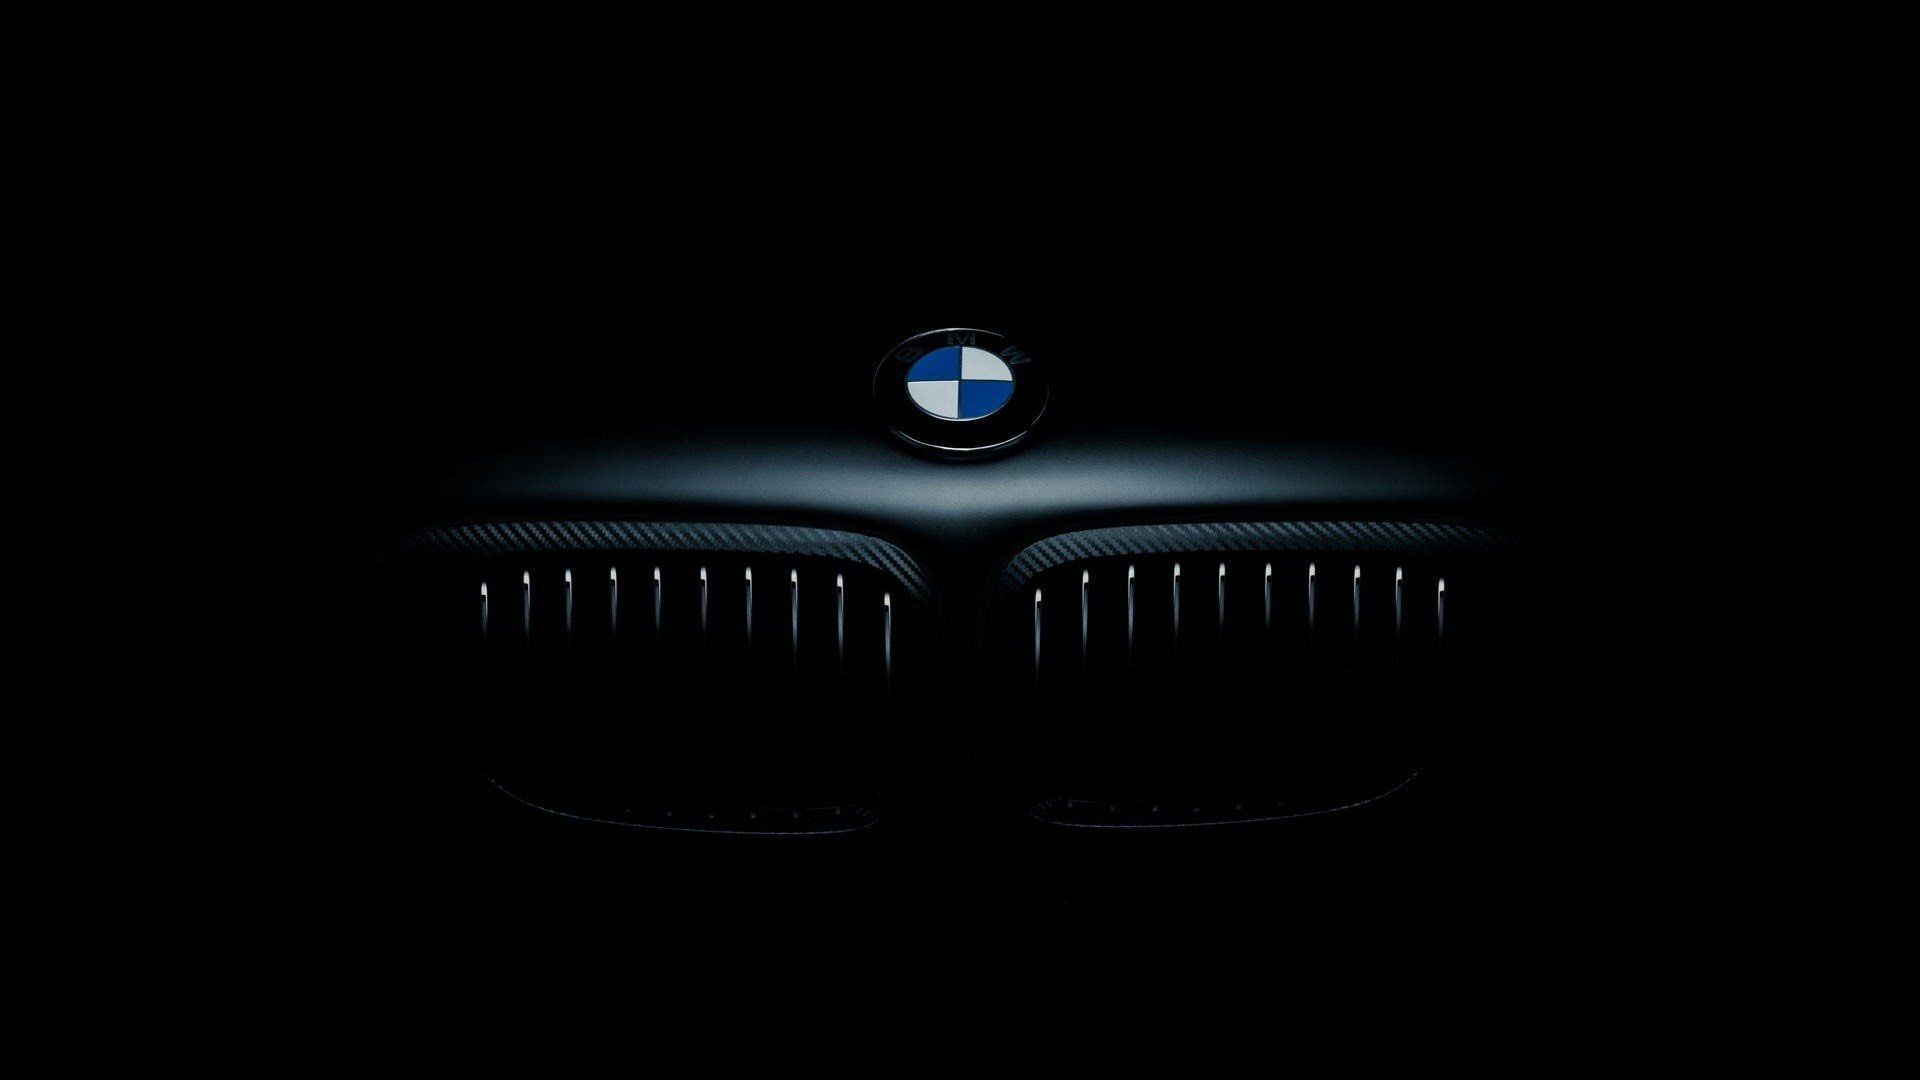 A black background with the front grill of a BMW in the center. - BMW